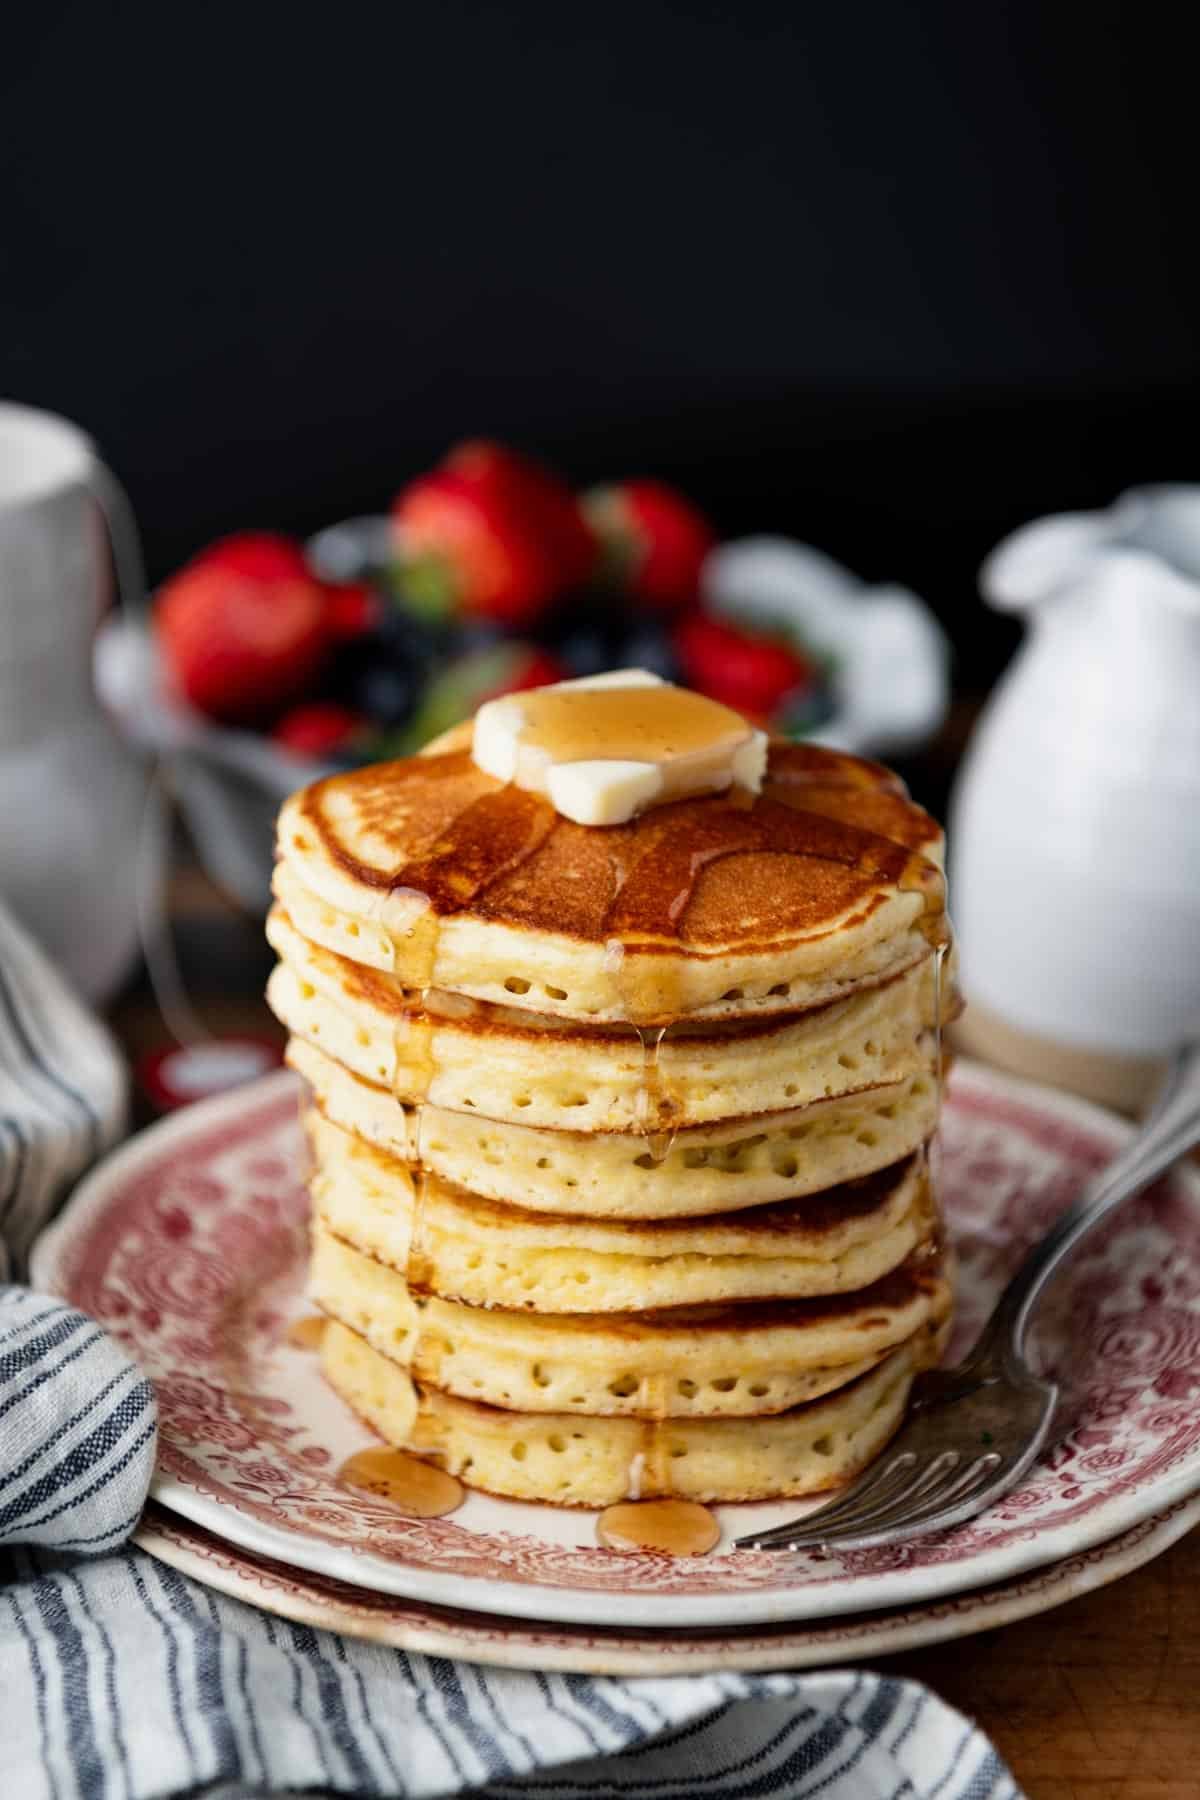 Cornmeal pancakes made with jiffy mix and served on a red and white vintage plate.